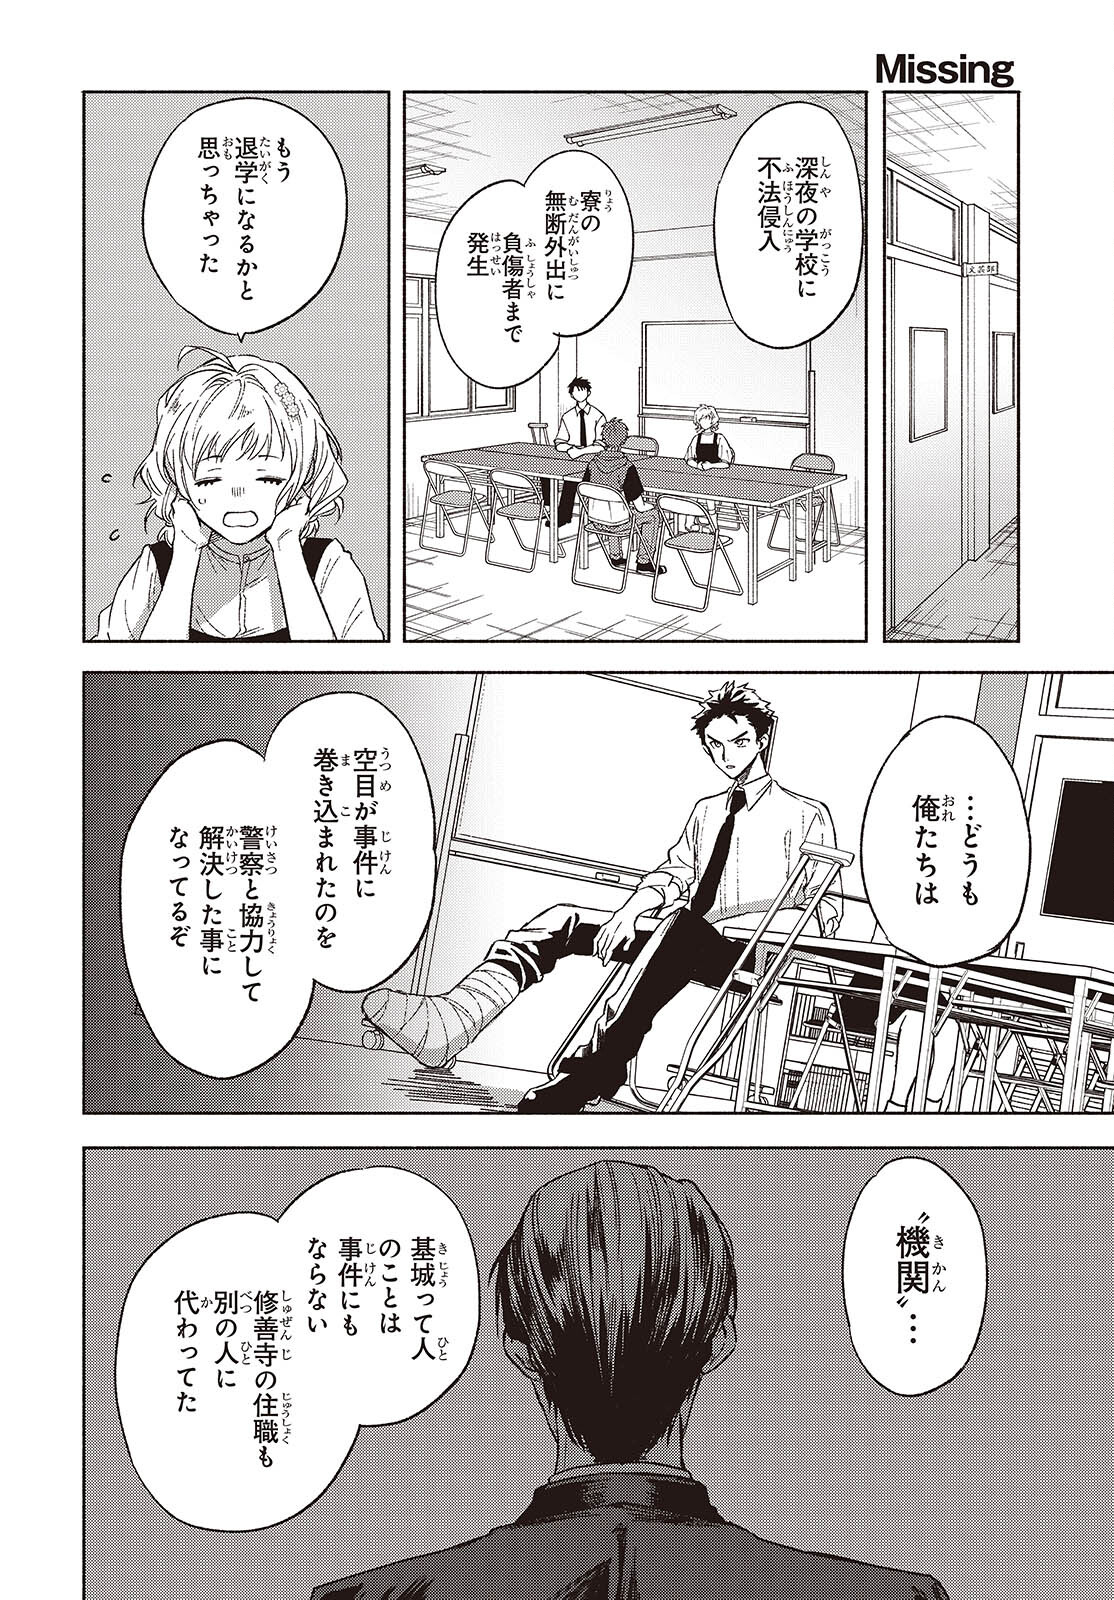 Missing 第10話 - Page 16